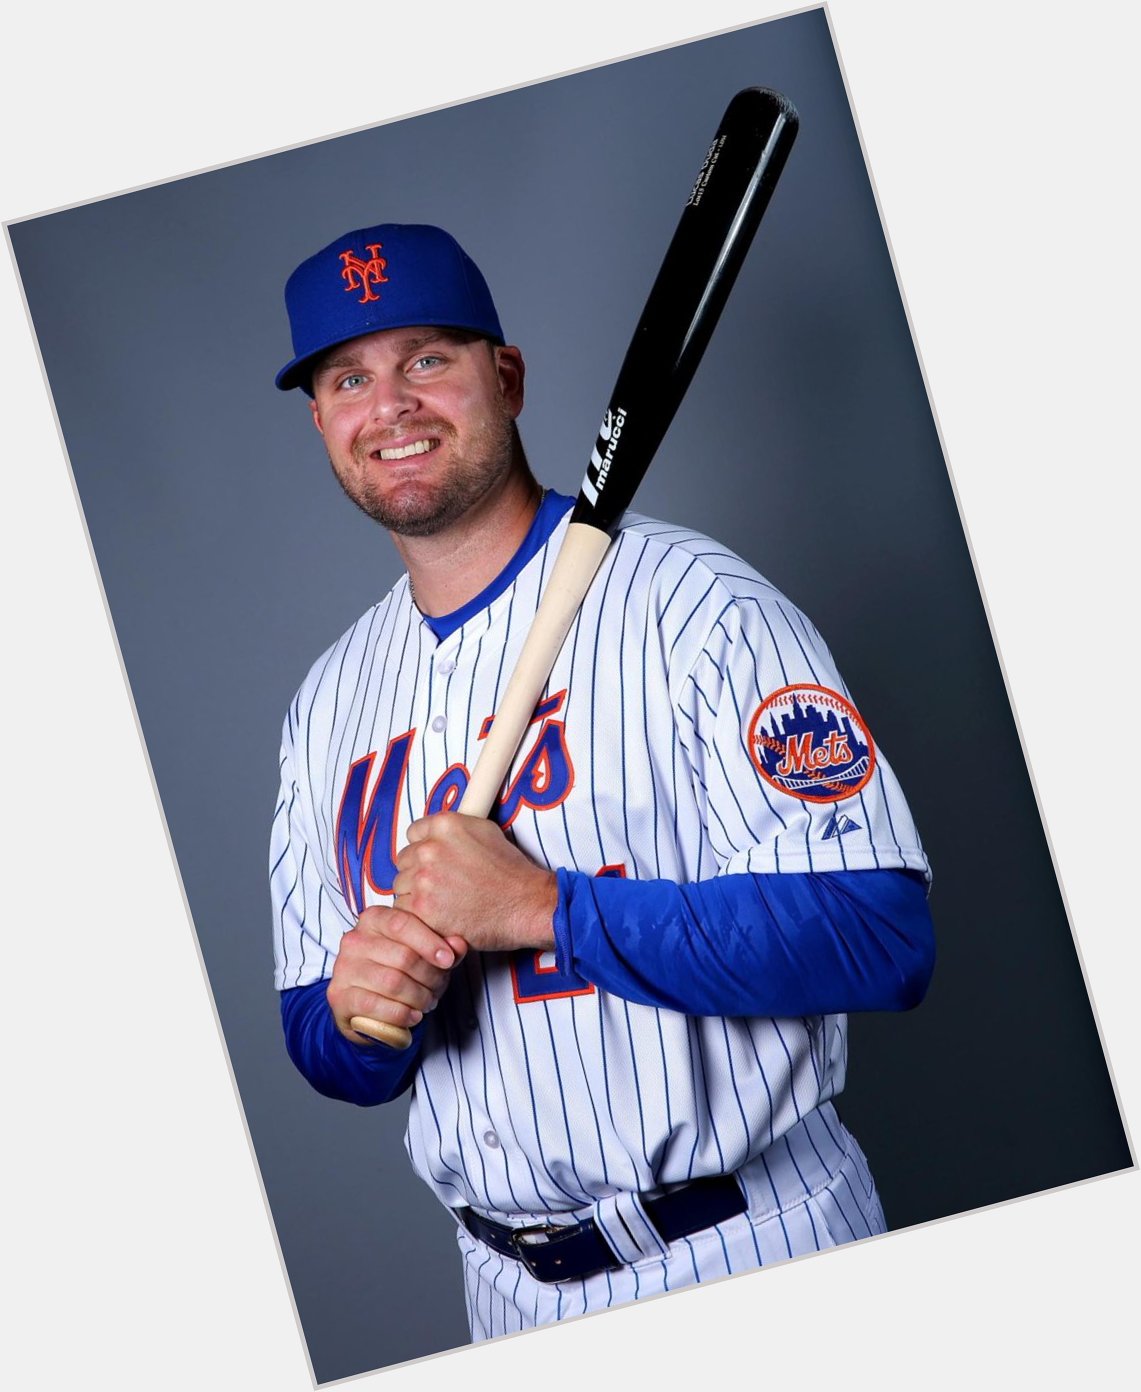 A happy birthday from Toasting The Town to the Lucas Duda! 